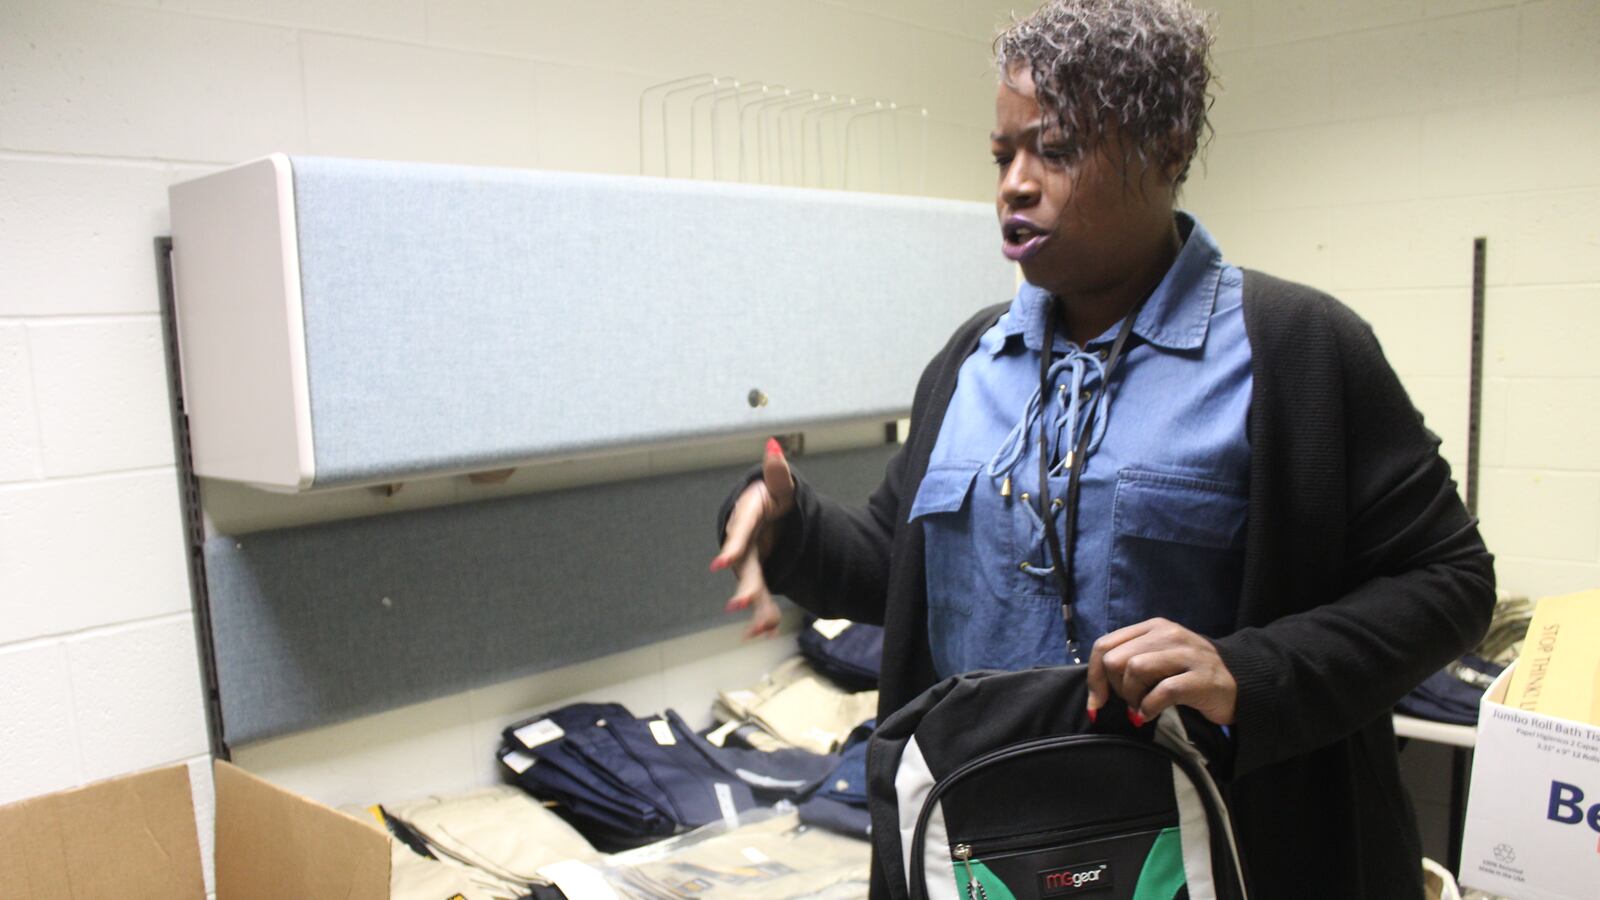 Charie Gibson, the McKinney-Vento liaison for Indianapolis Public Schools, talks about her role in serving homeless students while gathering supplies for a family.